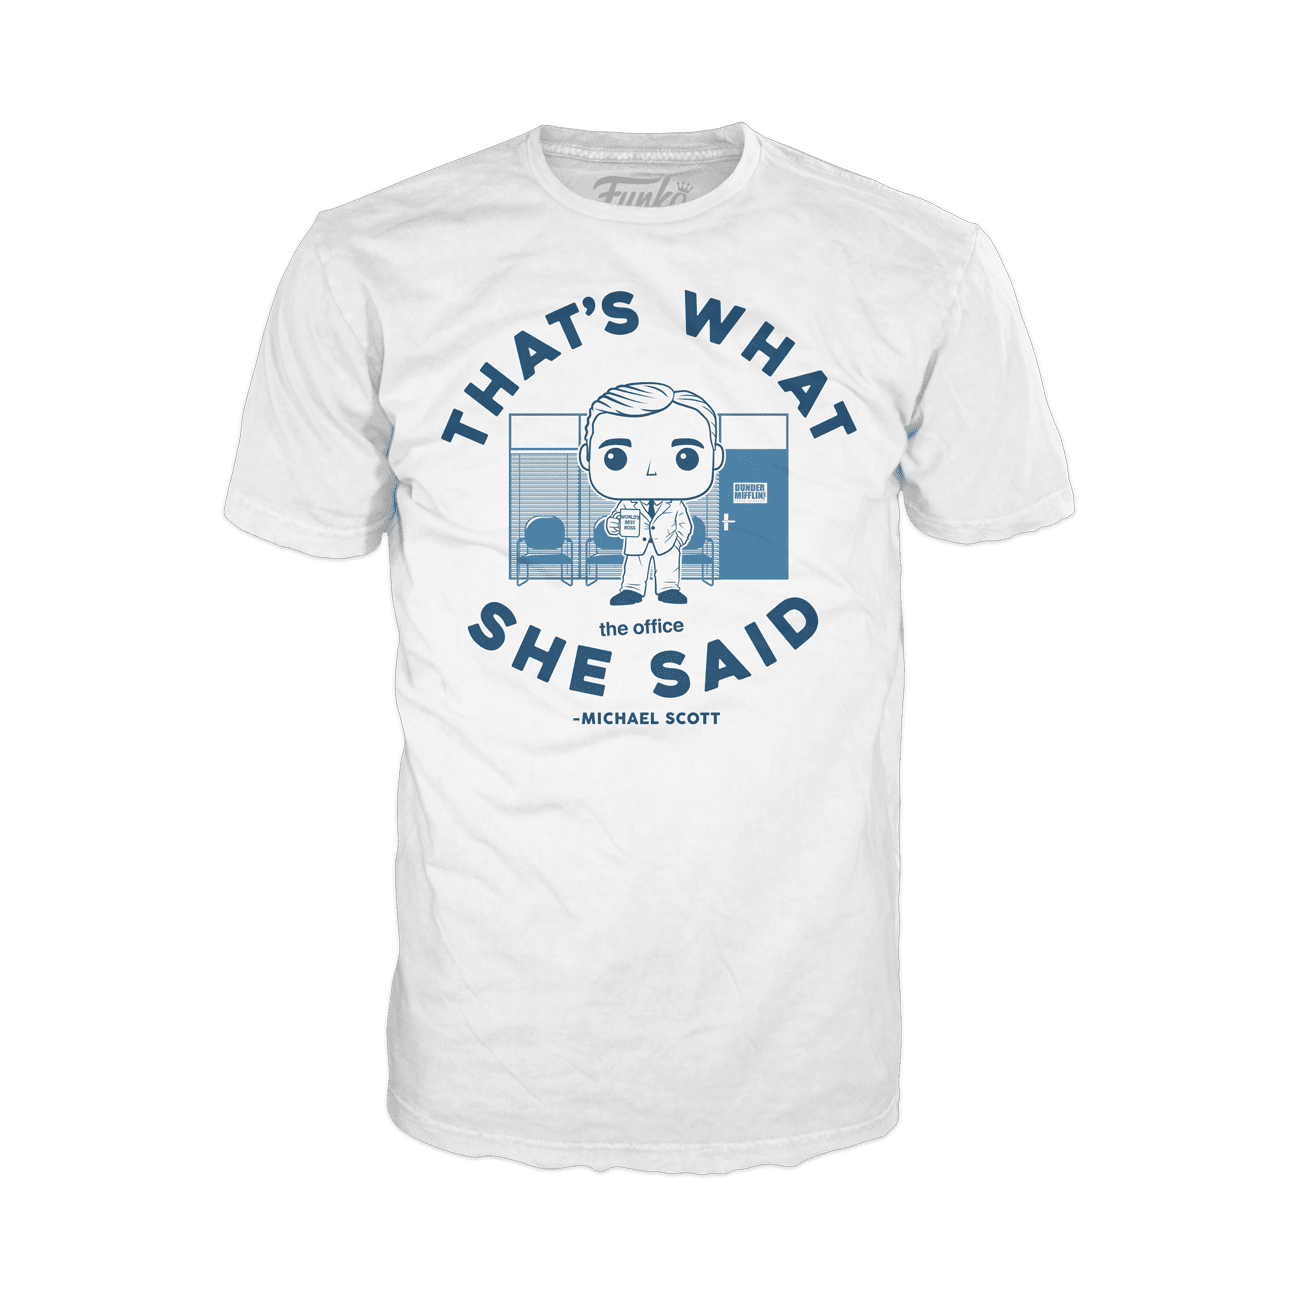 The Office T-Shirts - That's what she said - Michael Scott Classic T-Shirt  RB1801